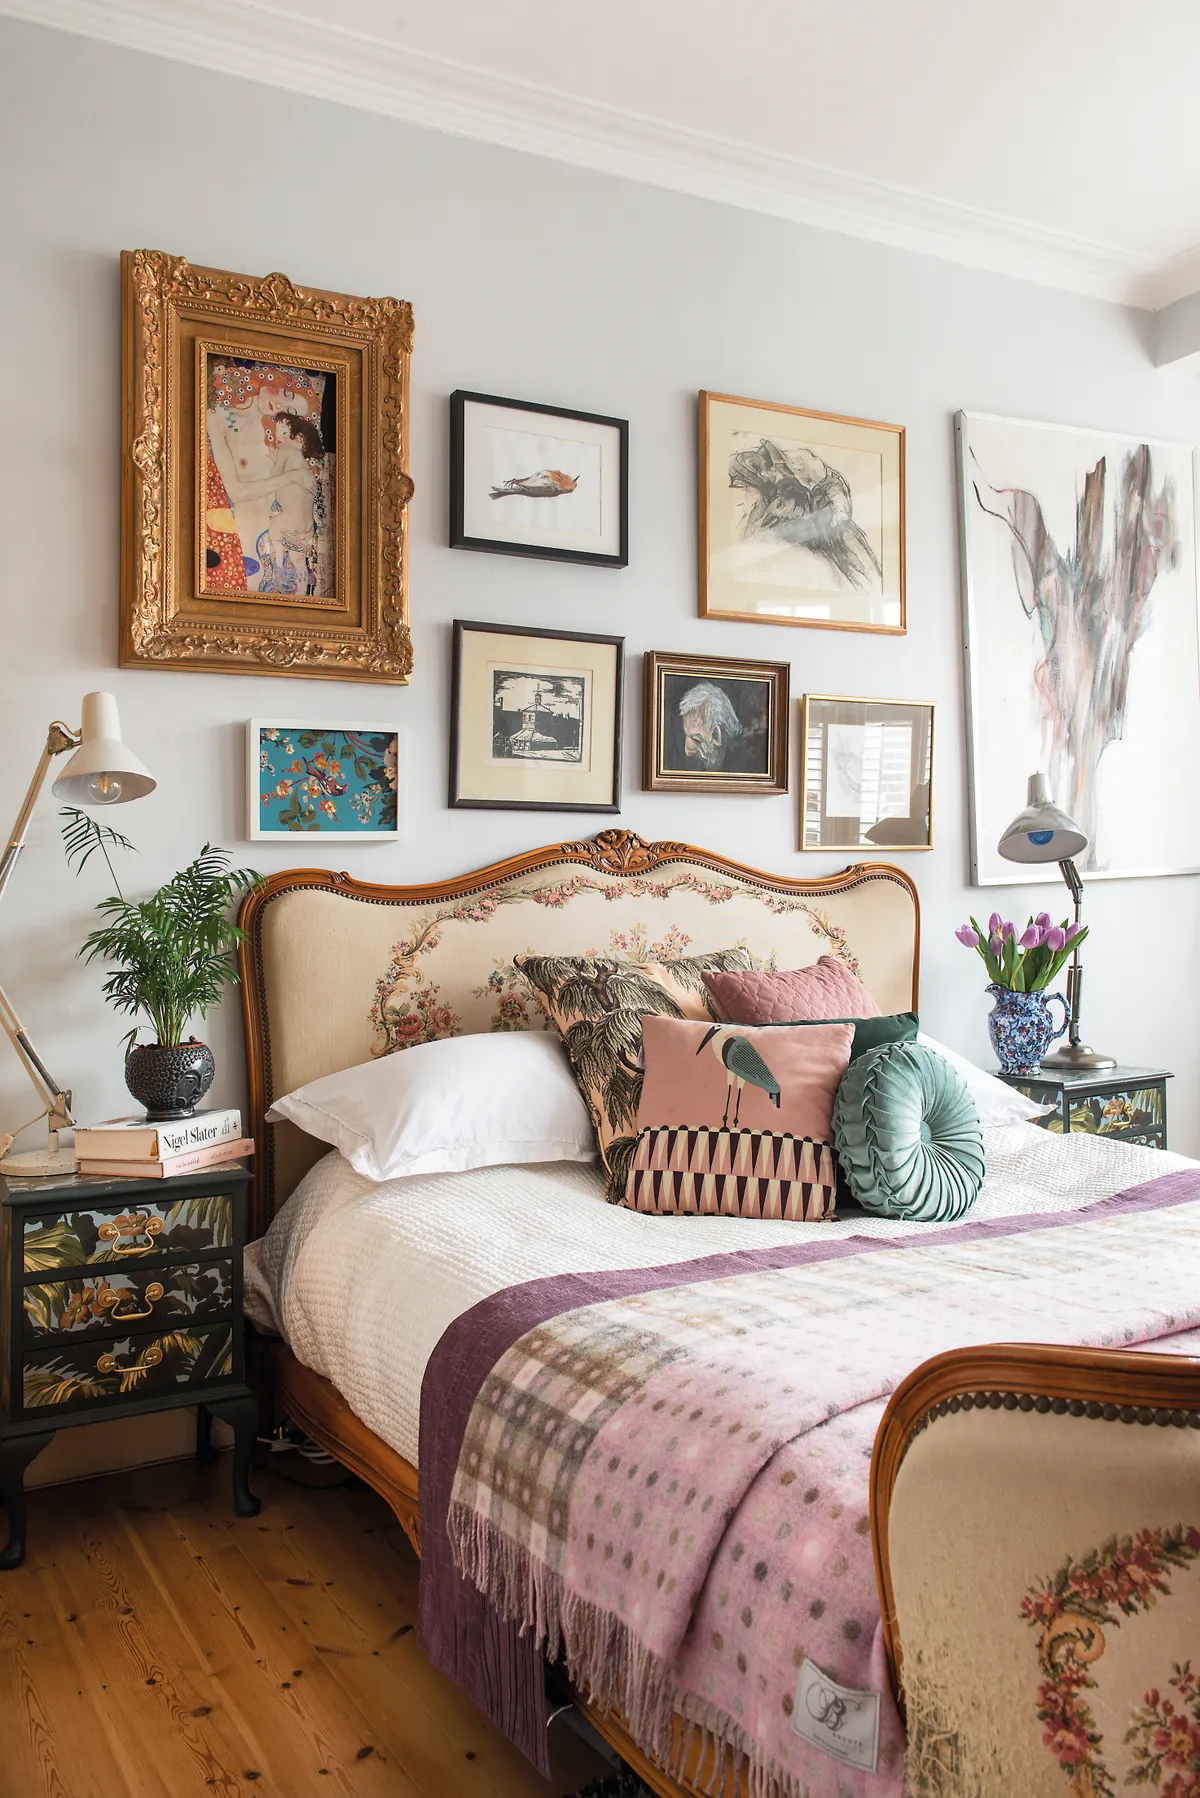 The bedroom walls are painted in Farrow & Ball’s Blackened, which acts as a subtle backdrop for the eclectic gallery wall. Vintage reading lamps add a contrasting functional feel beside the decorative upholstered bed